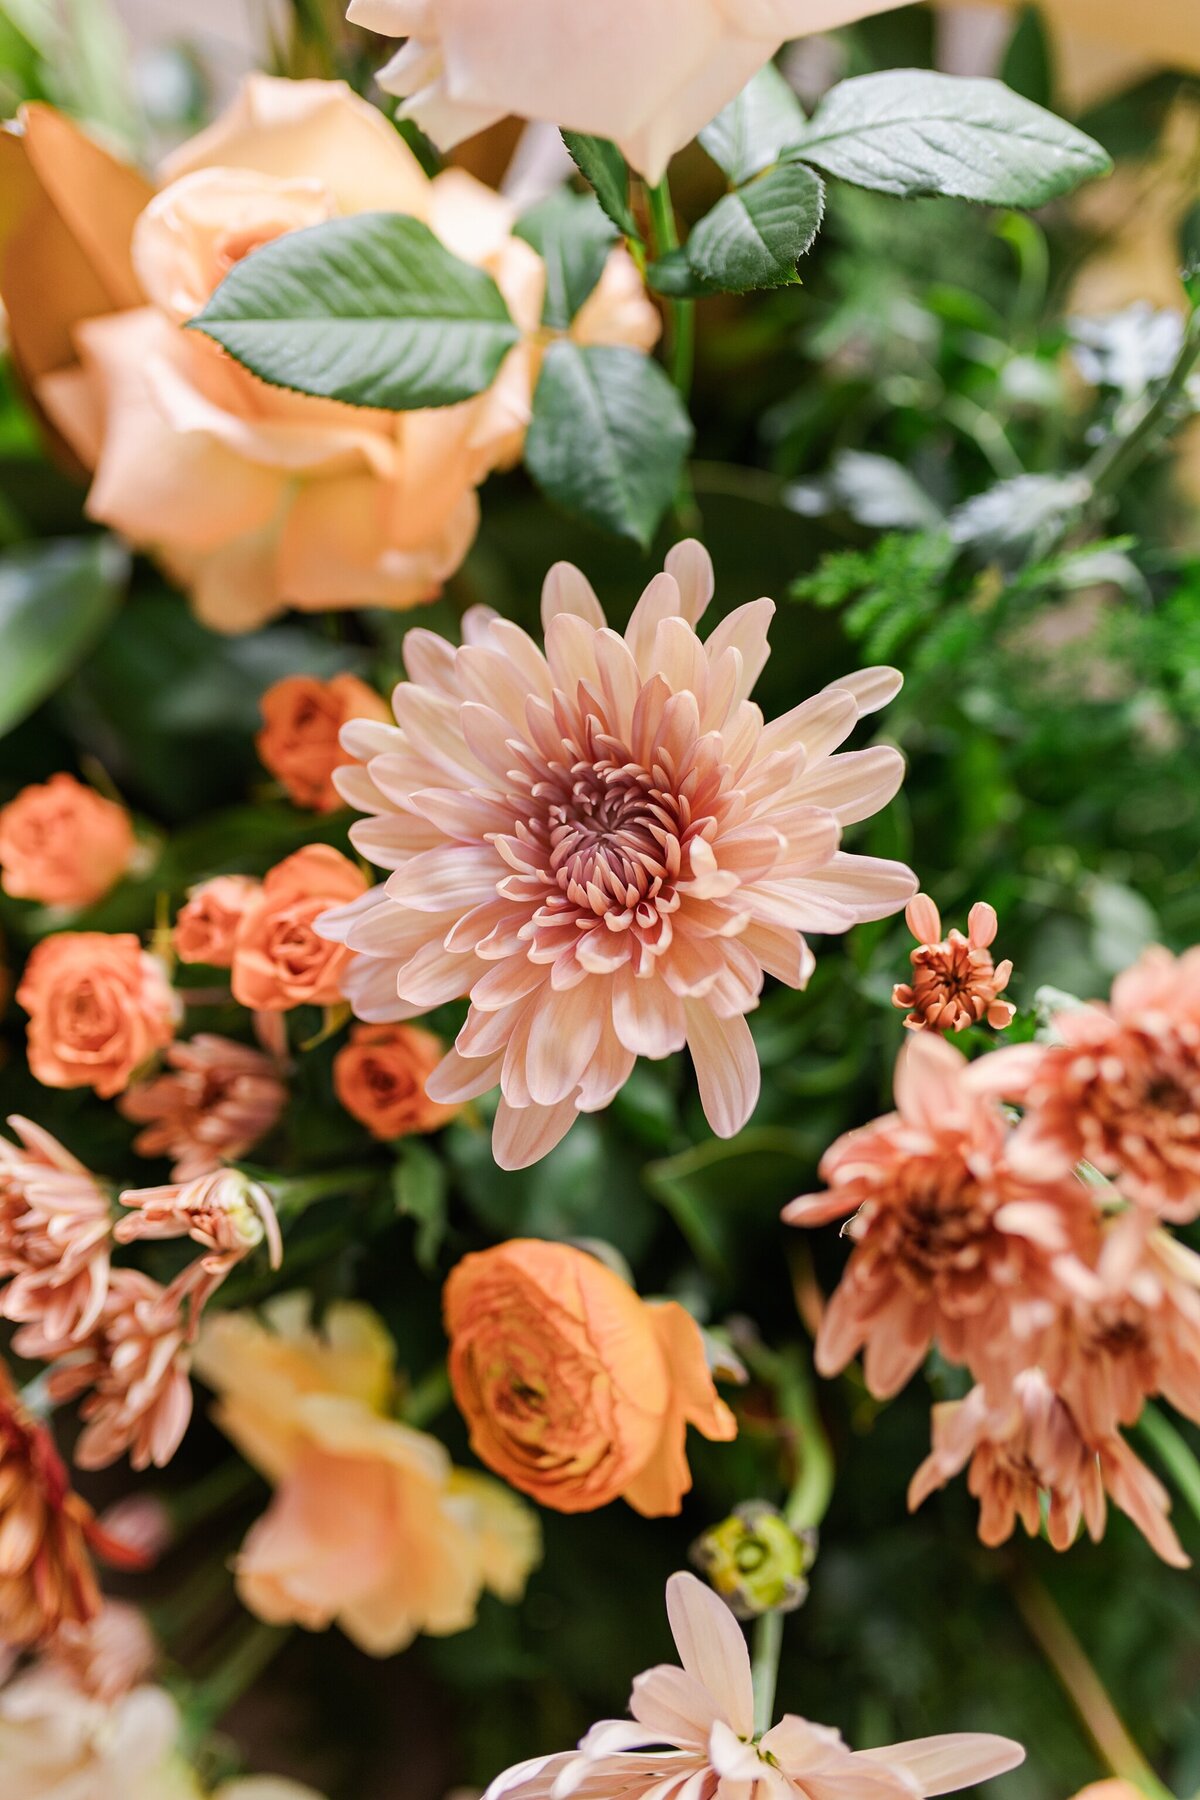 A detail shot of a wedding bouquet at a wedding in DFW, Texas. The flowers are all different shades of pink and orange and are surrounded by lots of greenery.